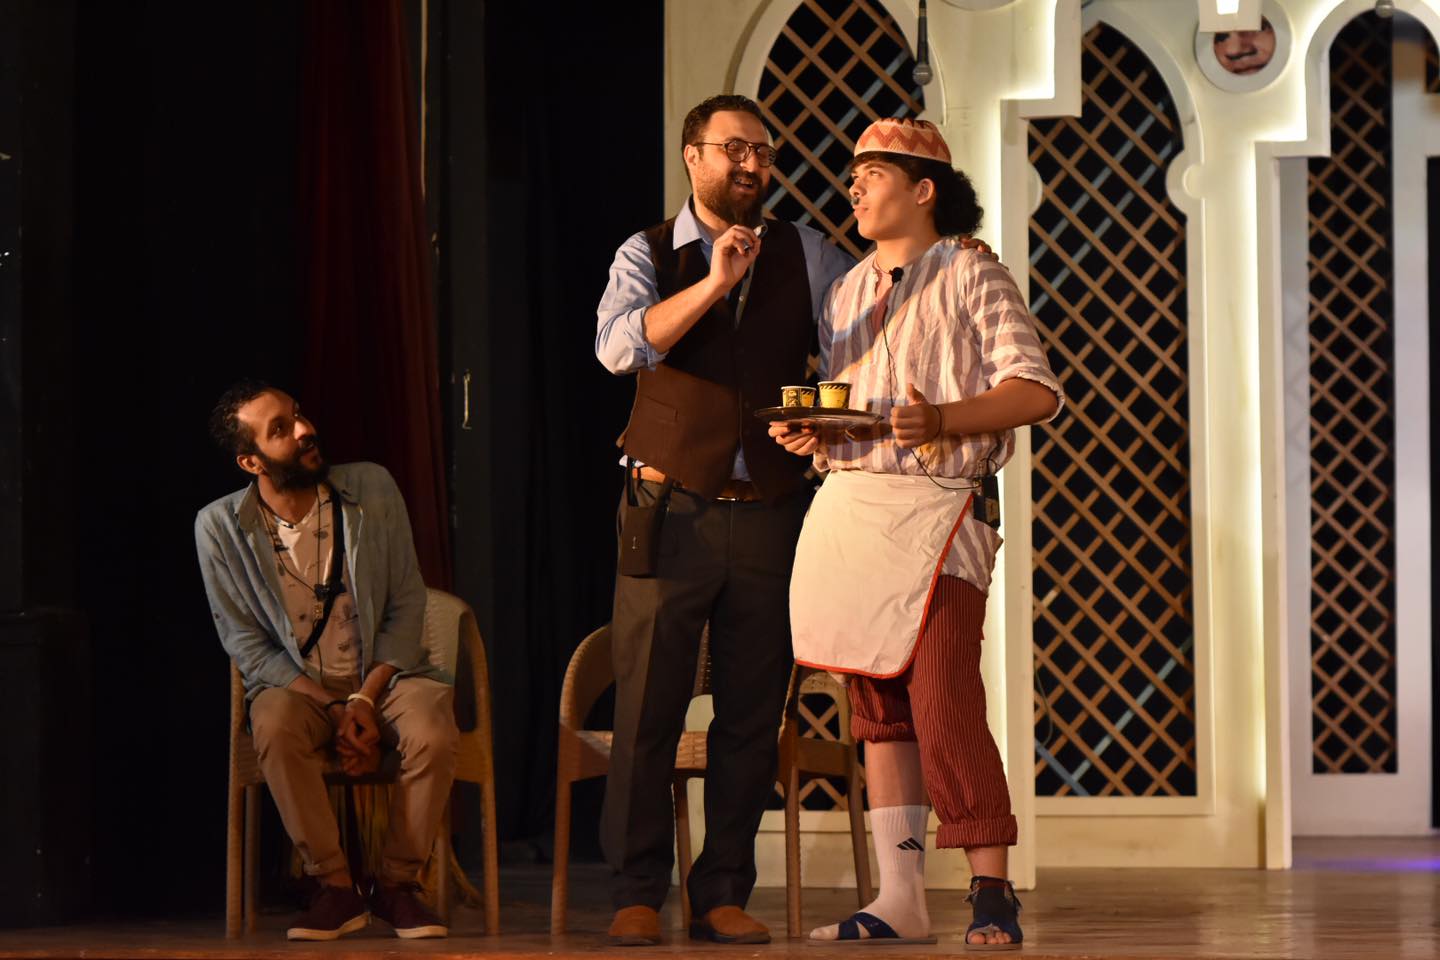 A scene from Egyptian director Mohamed Gabr's play, 'I'm Not Responsible' (Ana Mish Mas'ool) (Mohamed Gabr)